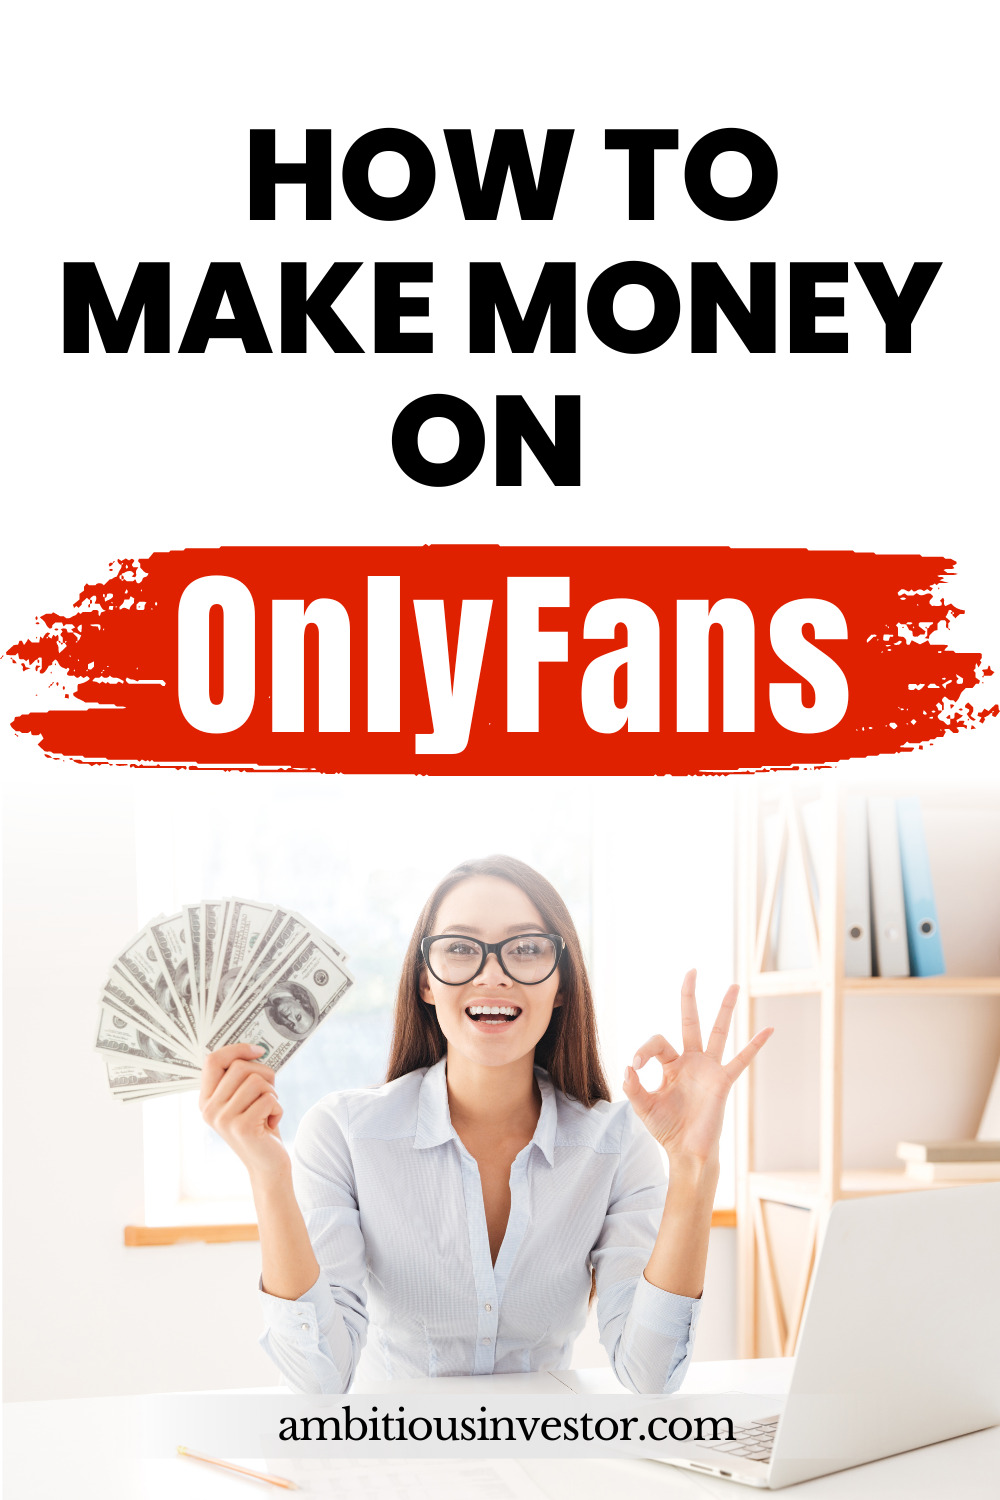 How to Make Money on OnlyFans – The Complete Guide 